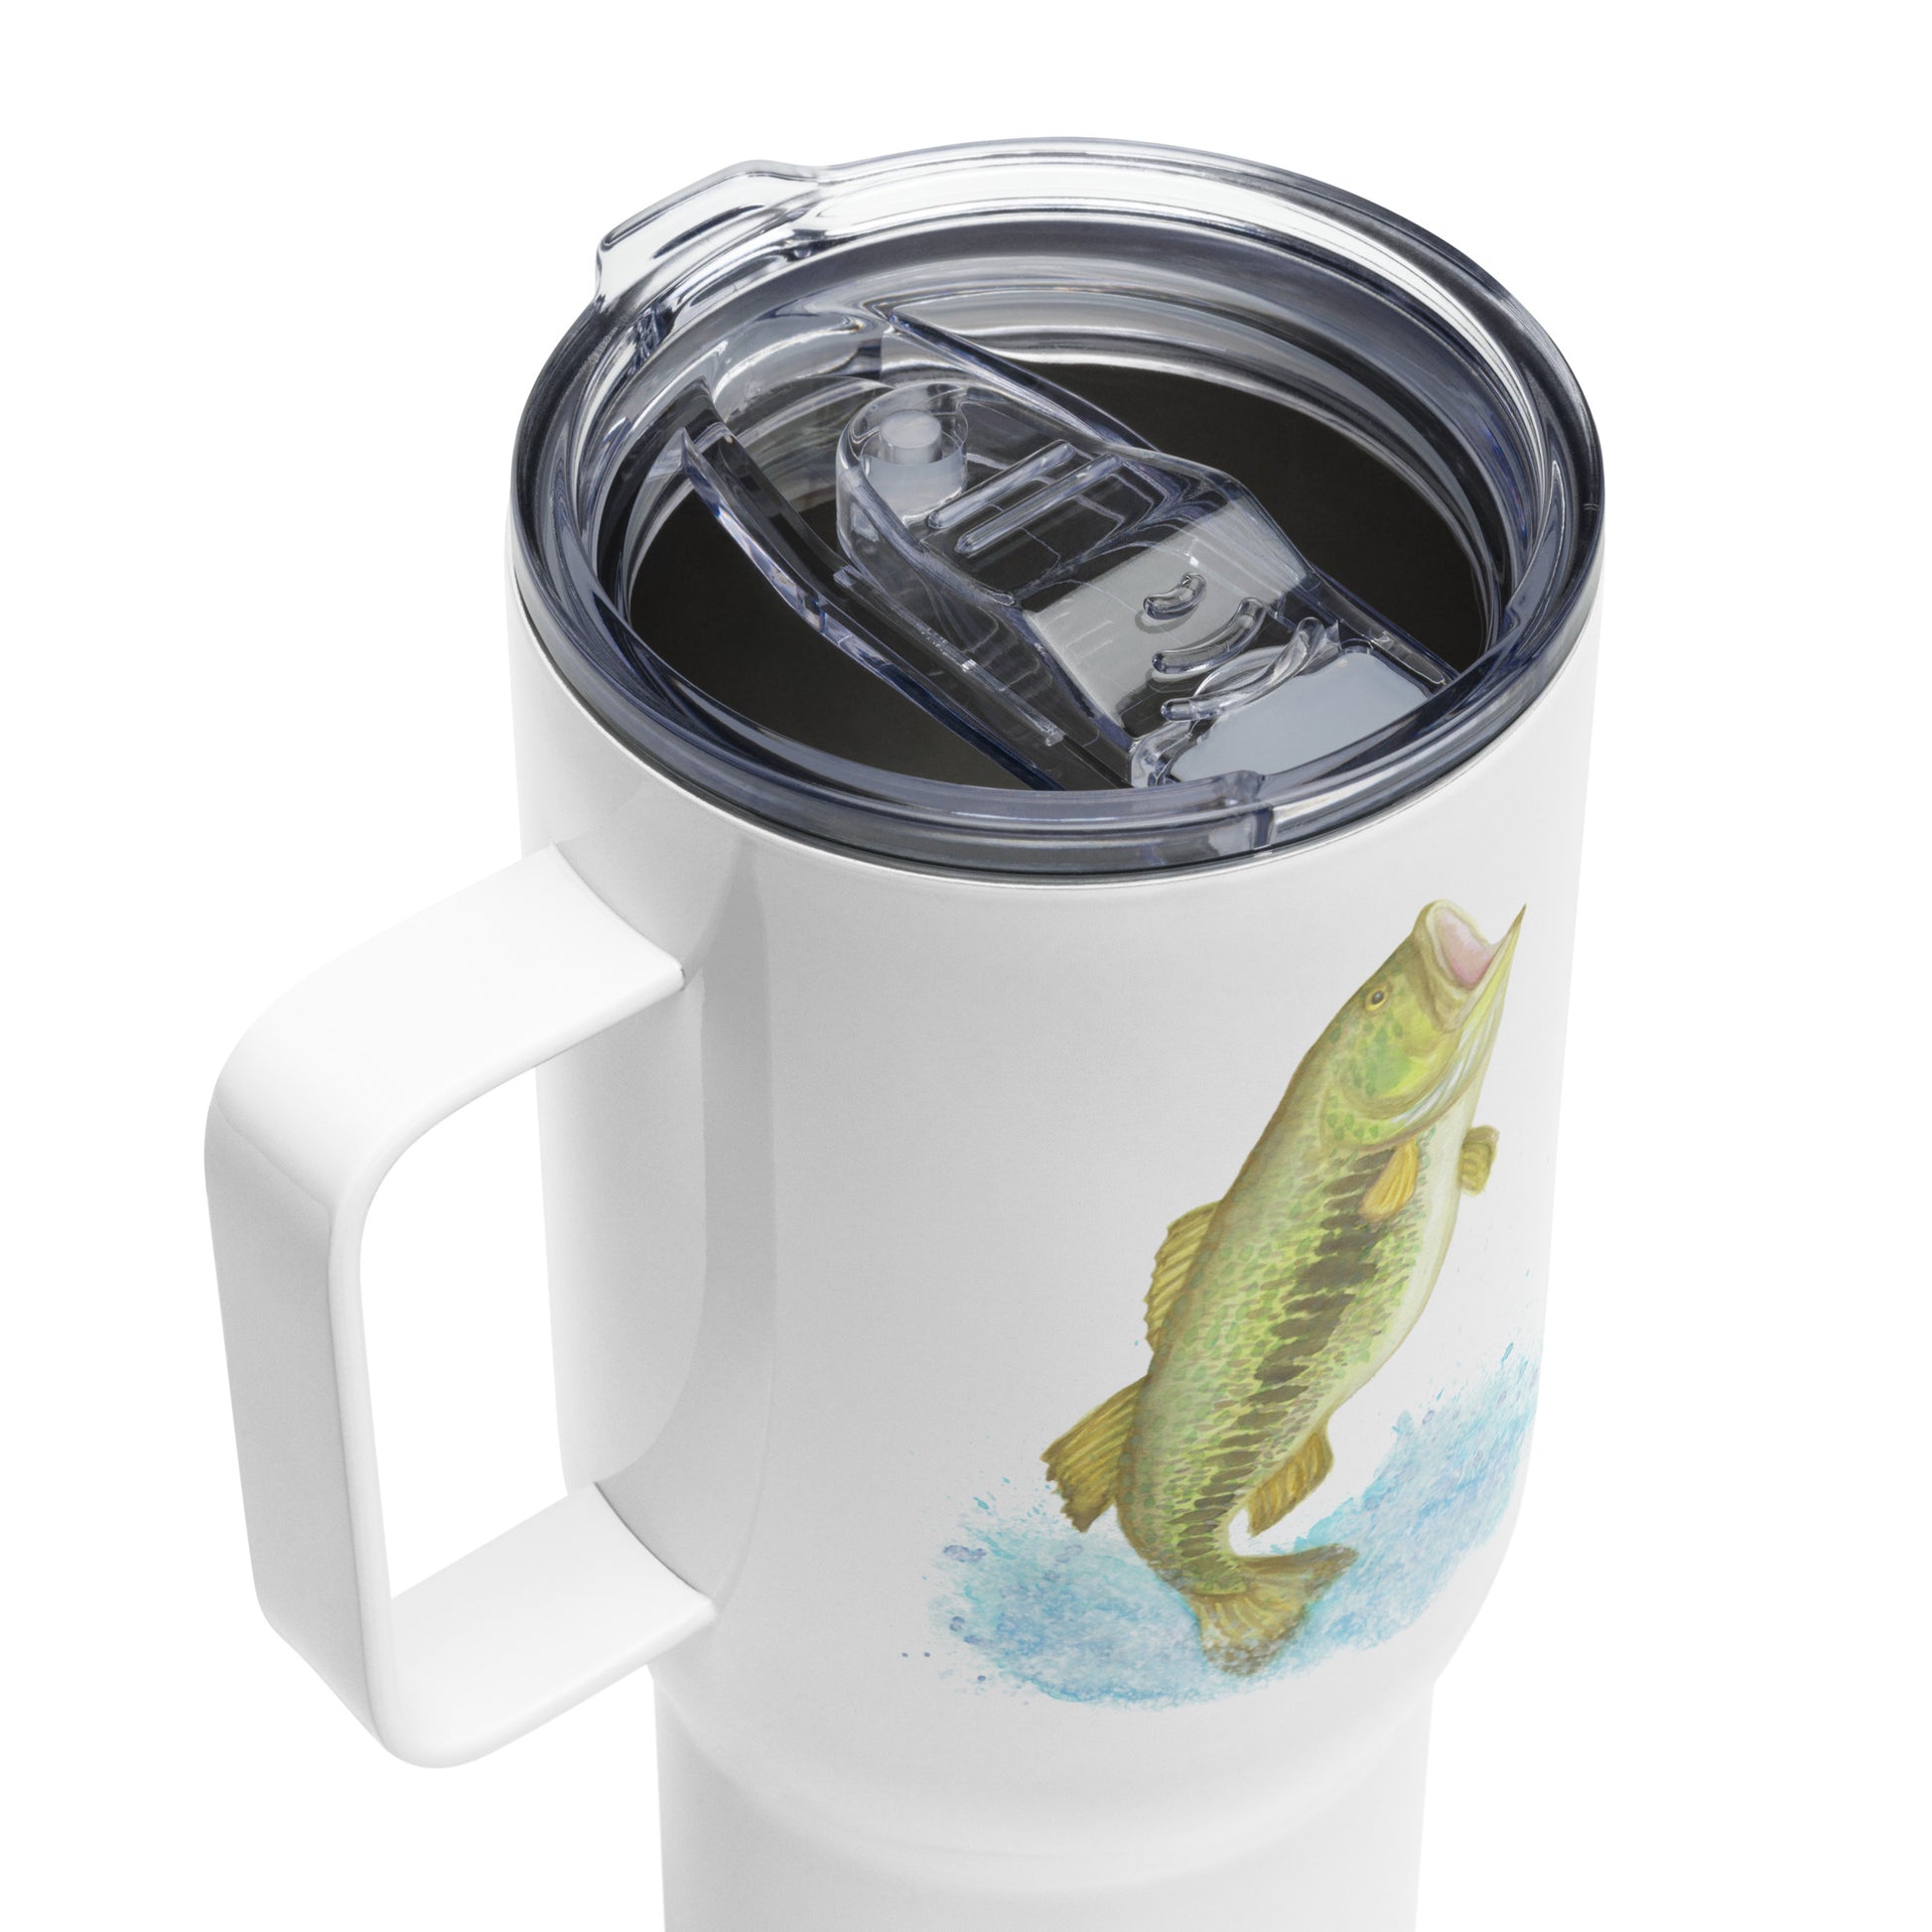 Stainless steel travel mug with handle. Holds 25 ounces of hot or cold drinks. Has print of watercolor bass fish on both sides. Fits most car cup holders. Comes with spill-proof BPA-free plastic lid. Detail view of lid.